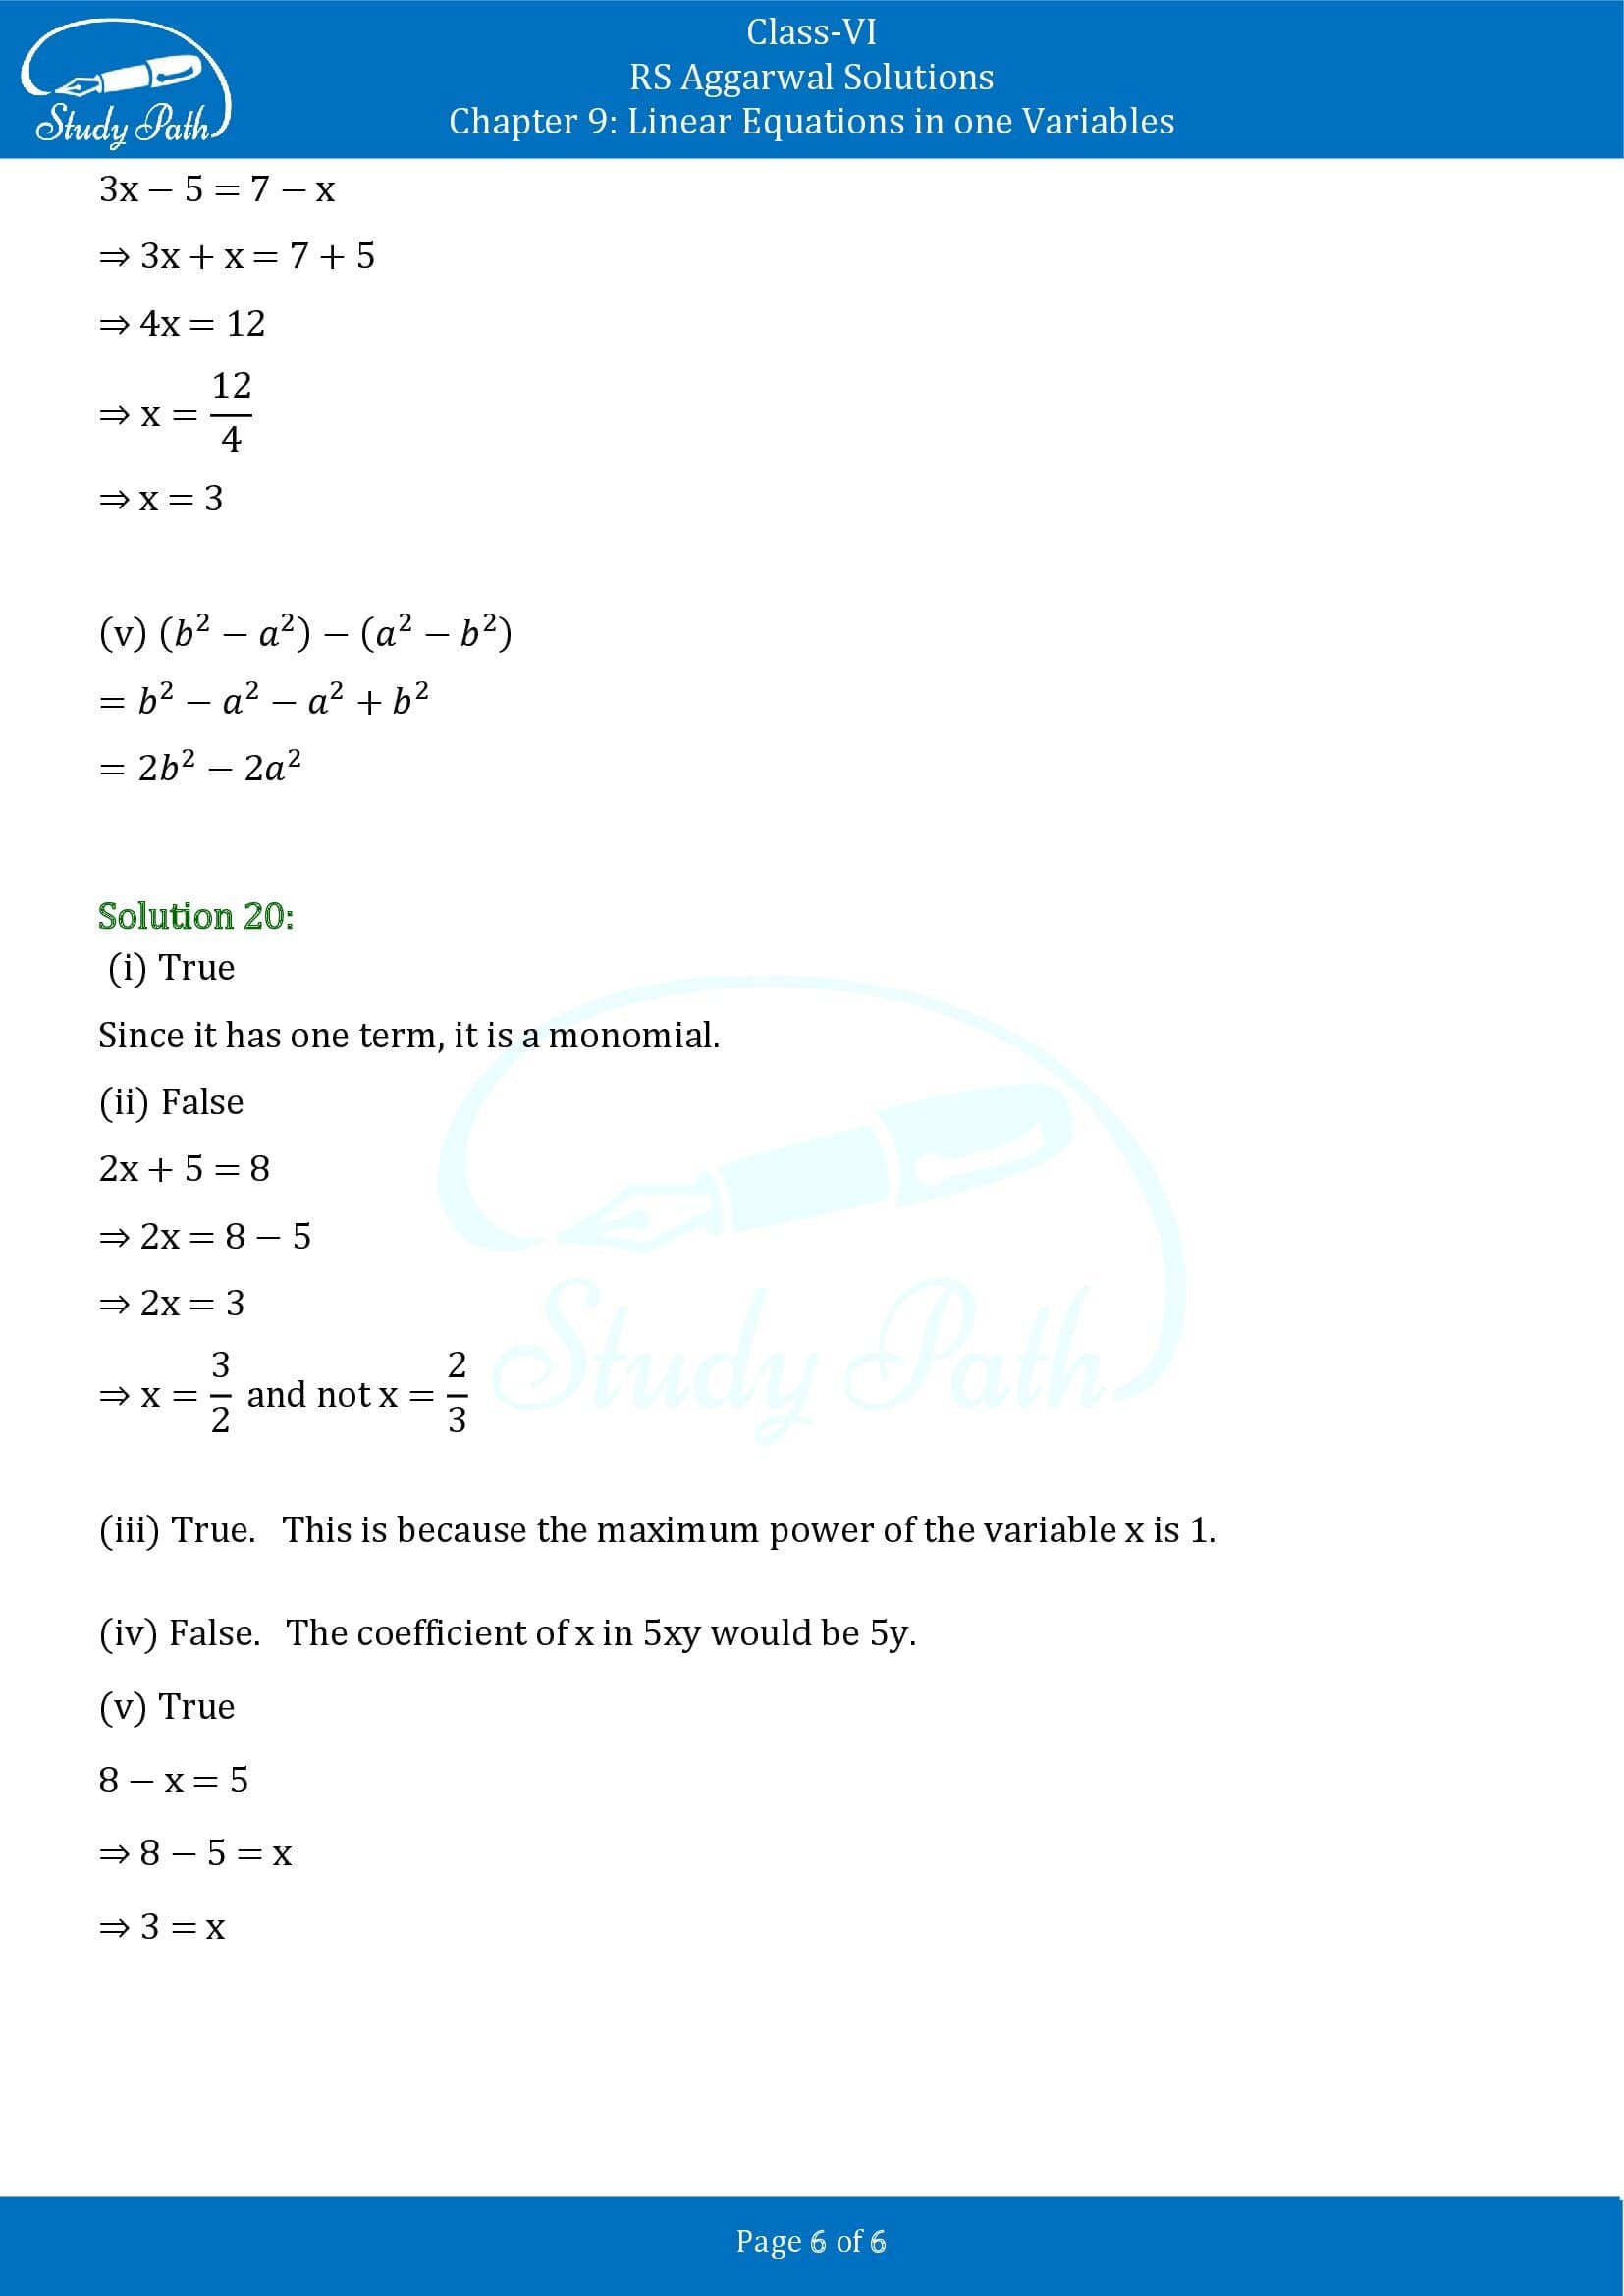 RS Aggarwal Solutions Class 6 Chapter 9 Linear Equations in One Variable Test Paper 00006